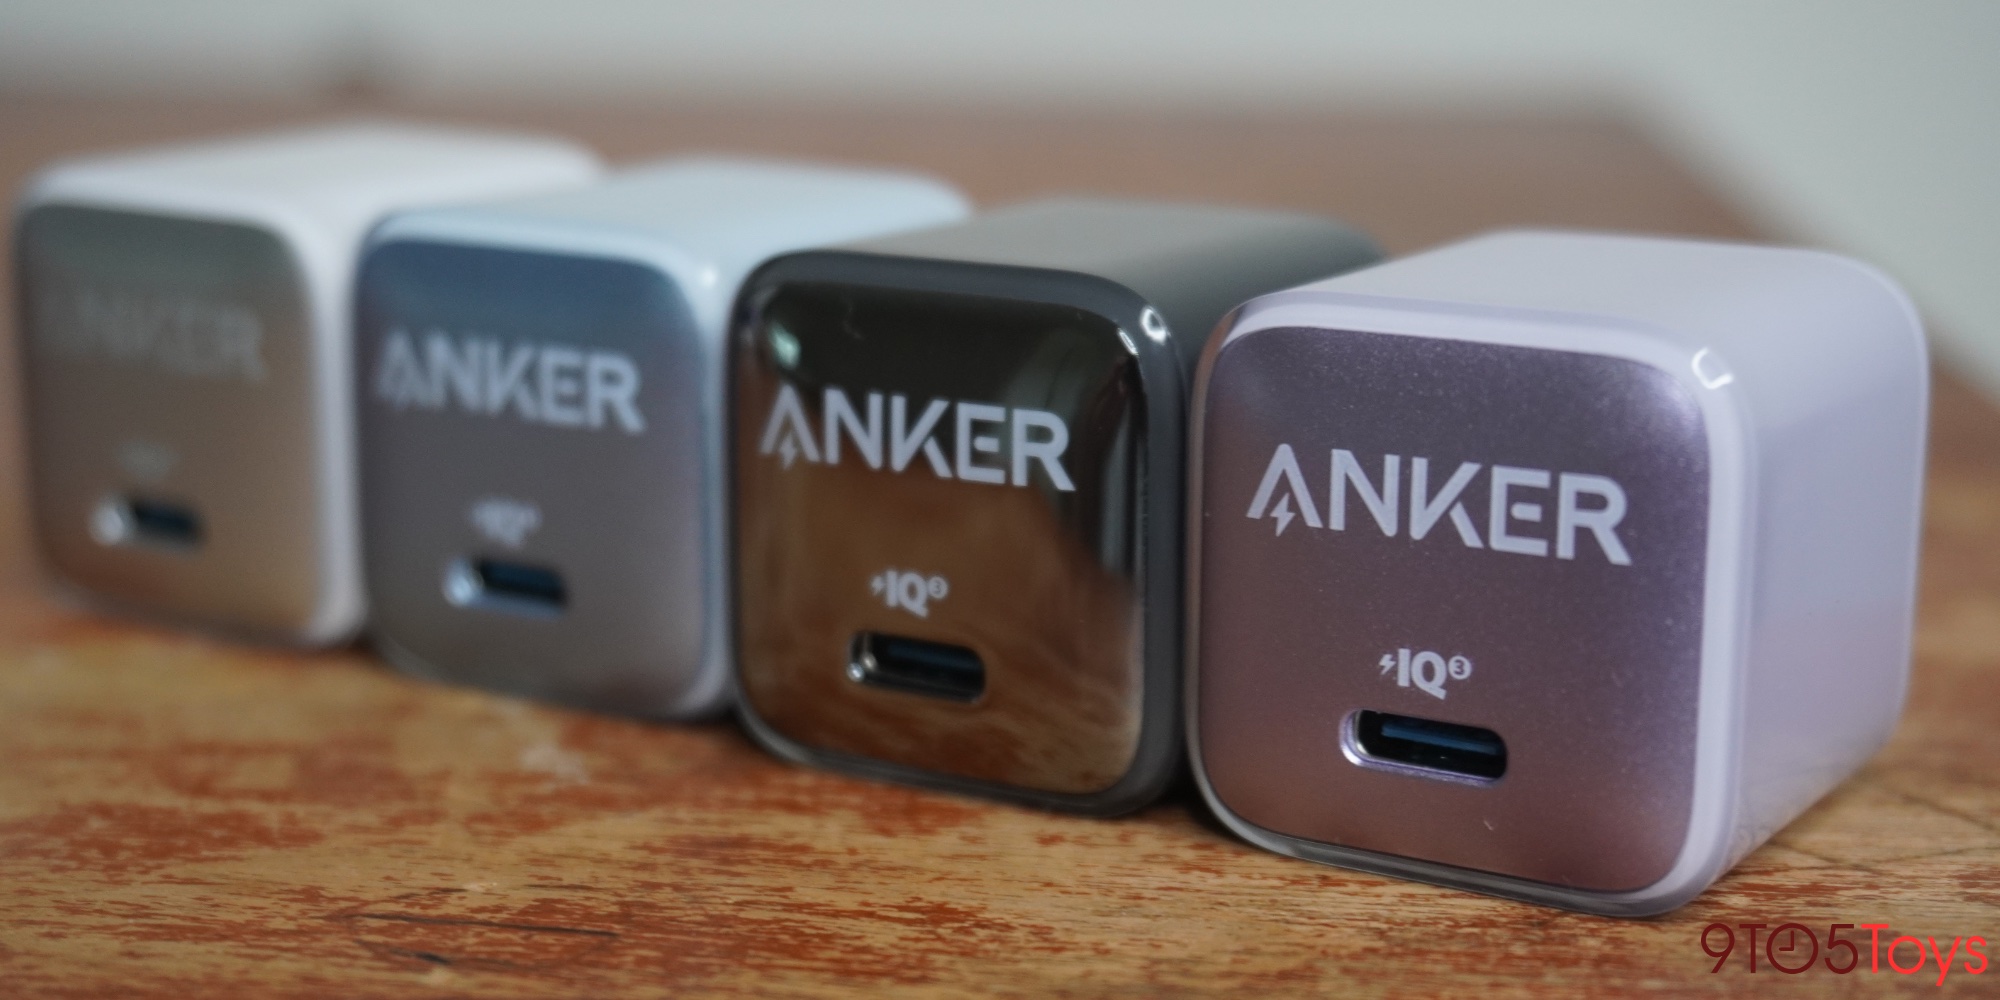 Anker 511 Nano 3 charger review